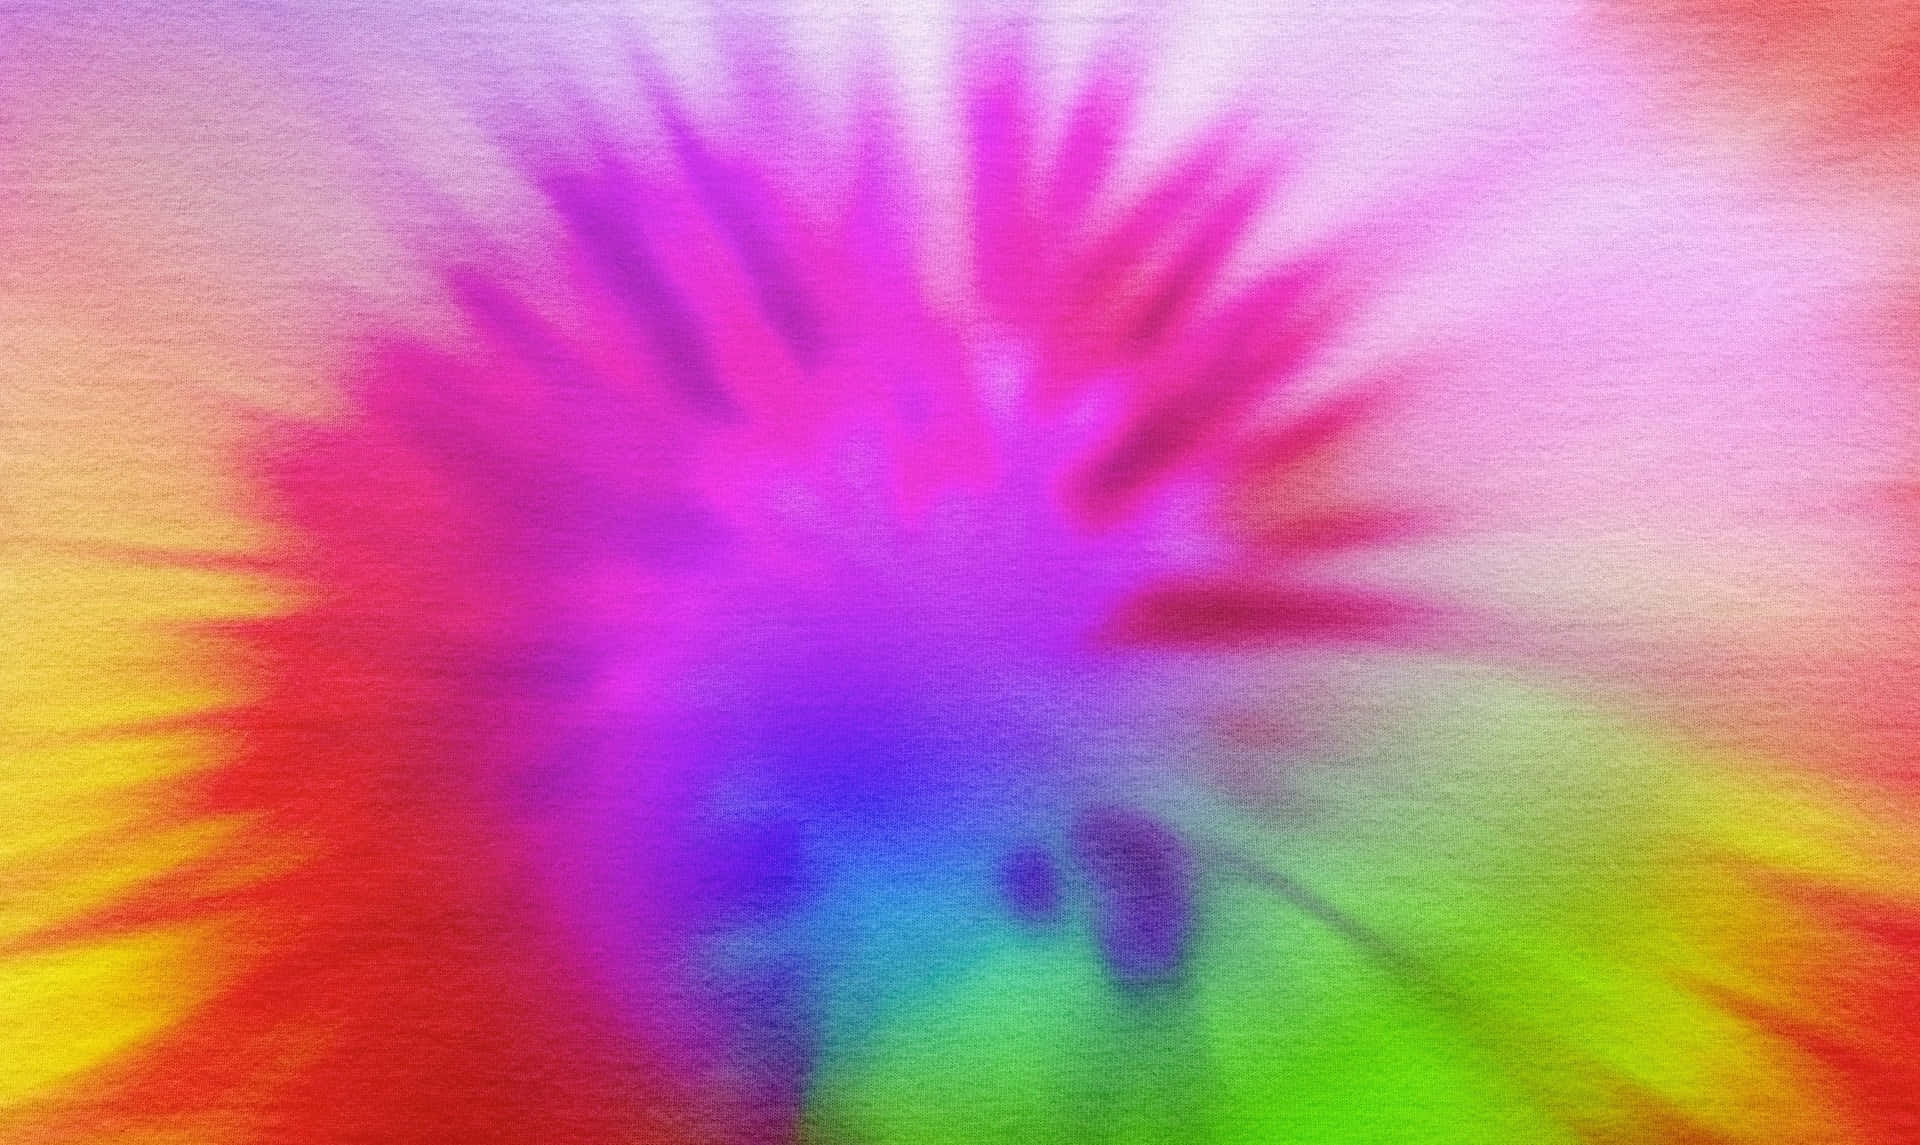 A Vibrant and Colorful Tie Dye Background